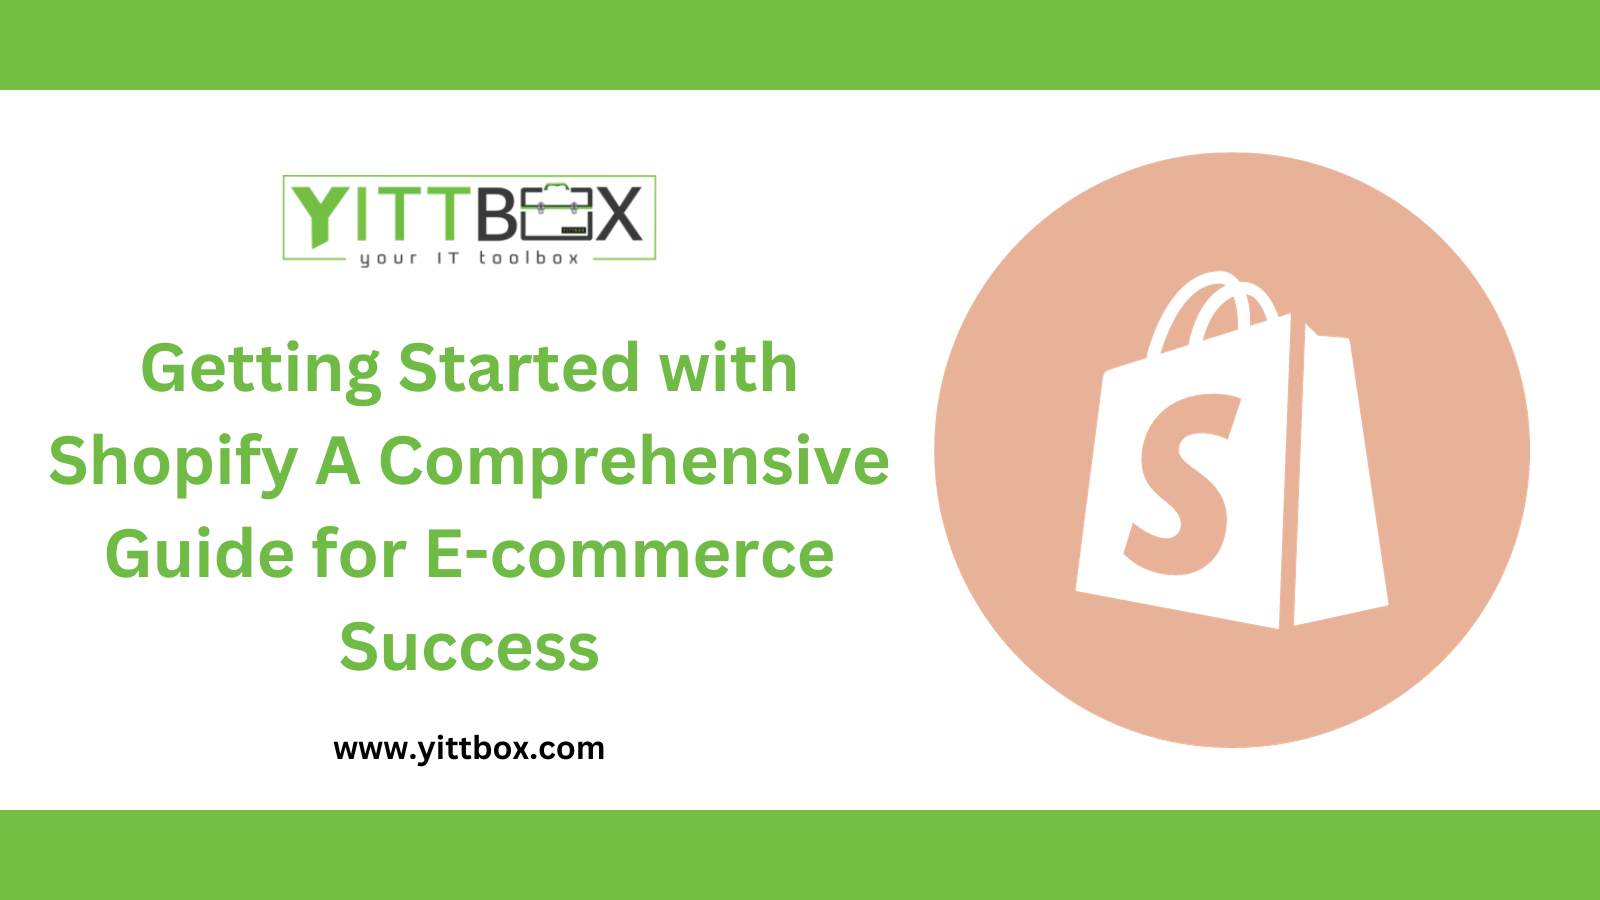 Getting Started with Shopify: A Comprehensive Guide for E-commerce Success